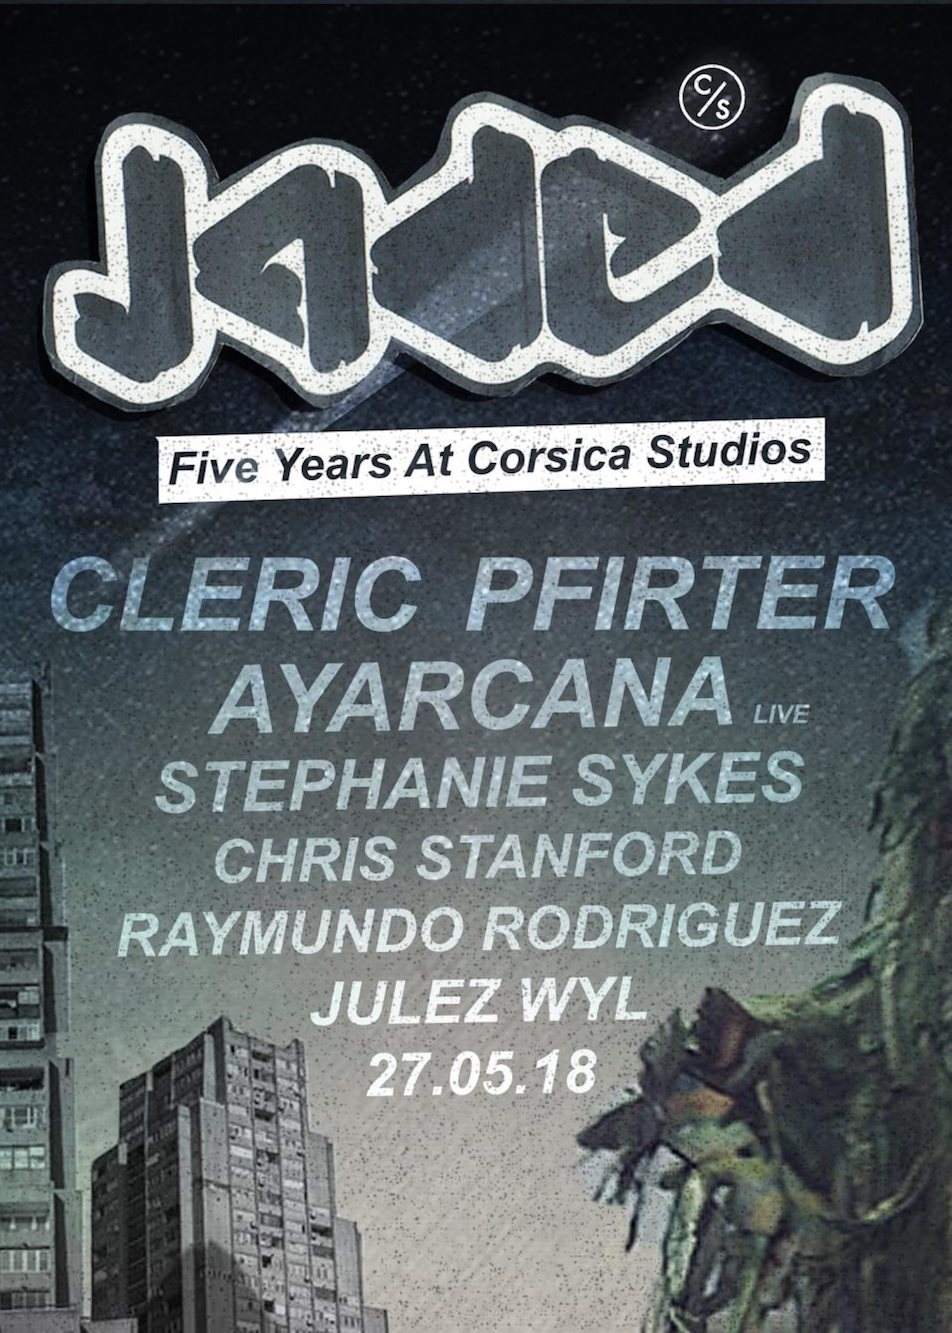 London party Jaded celebrates five years at Corsica Studios with Pfirter, Cleric image